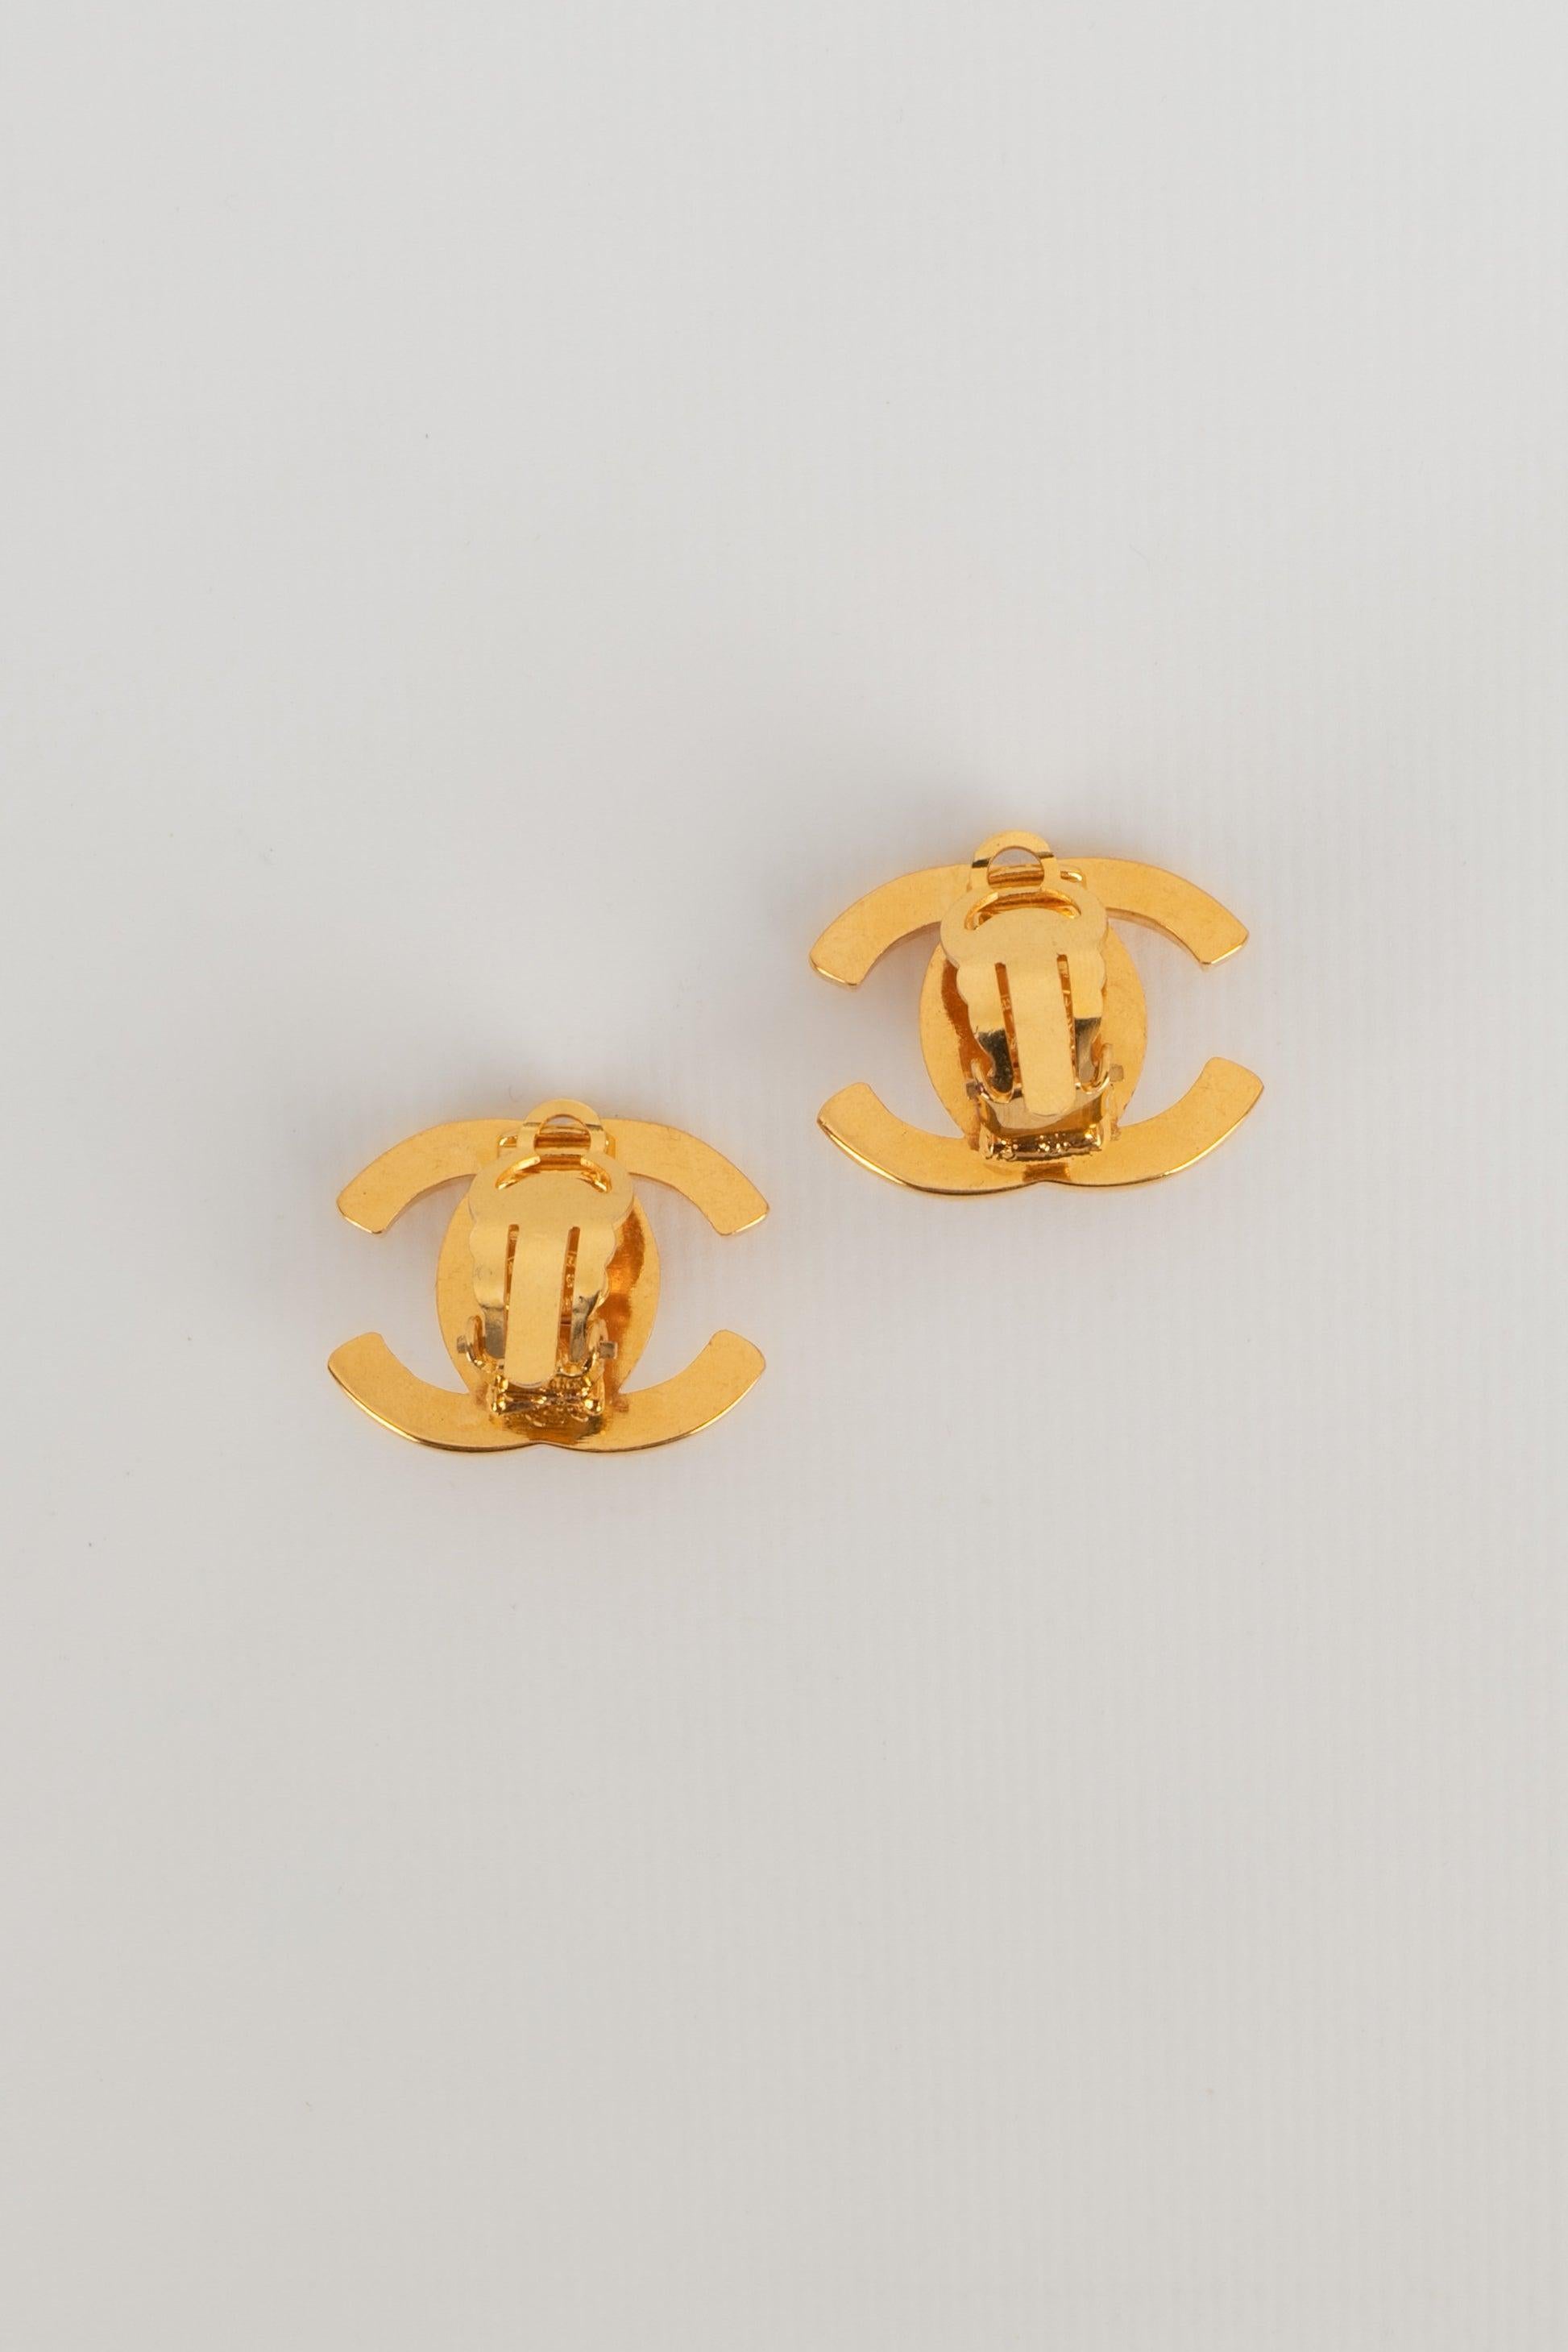 Chanel- (Made in France) Turn-lock design golden metal clip-on earrings. 1995 Fall-Winter Collection.

Additional information:
Condition: Very good condition
Dimensions: 2 cm x 2.6 cm
Period: 20th Century

Seller Reference: BOB22
